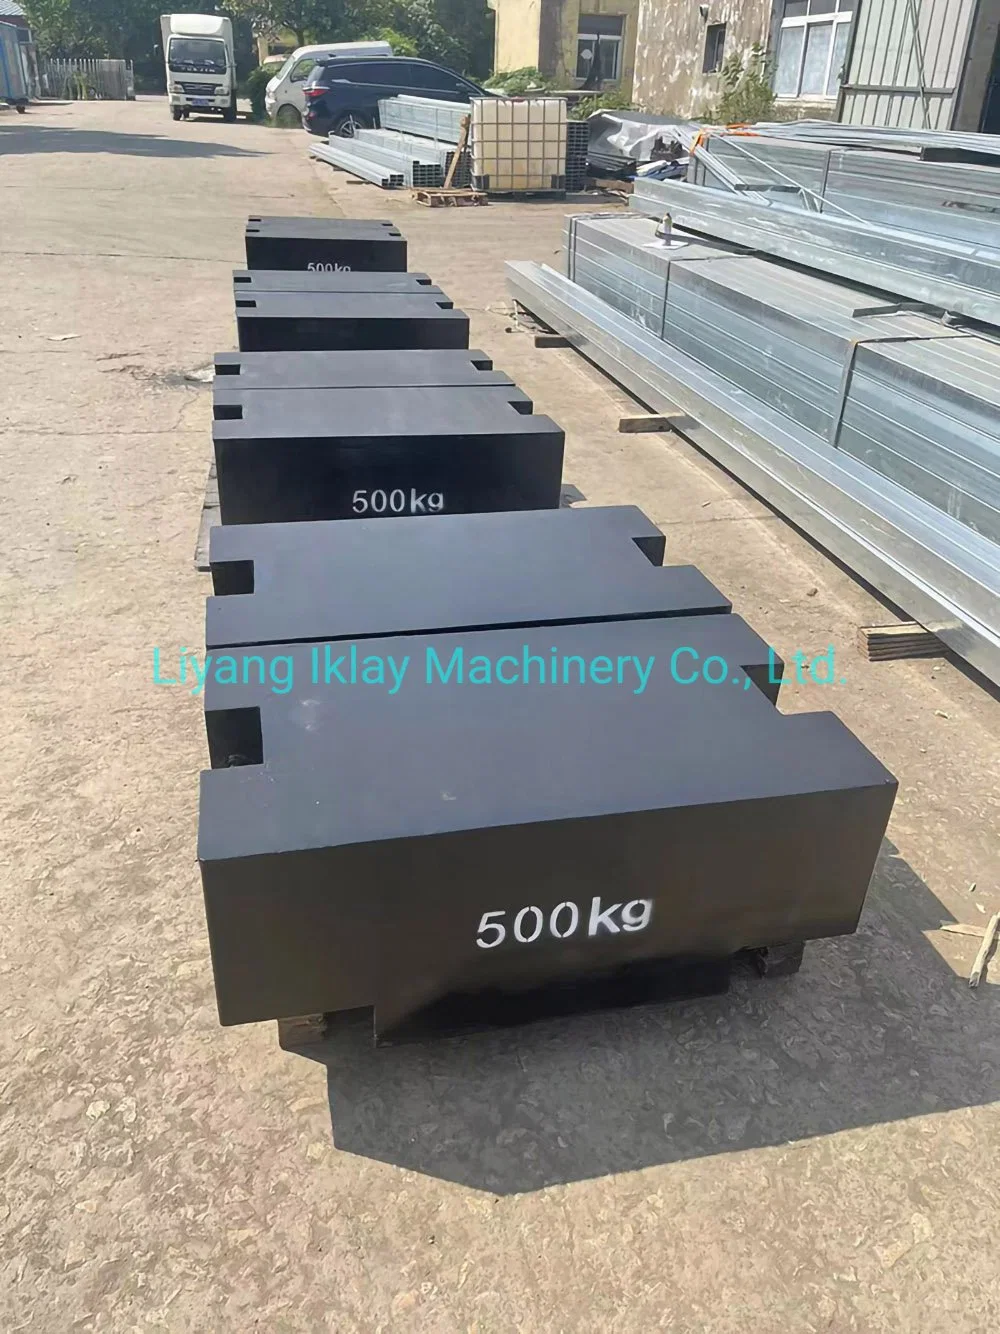 5kg 10kg 20kg Load Testing Weights for Truck Scales 500kg Roller Weights for Floor Scales 1000kg Cast Iron Test Weights Price